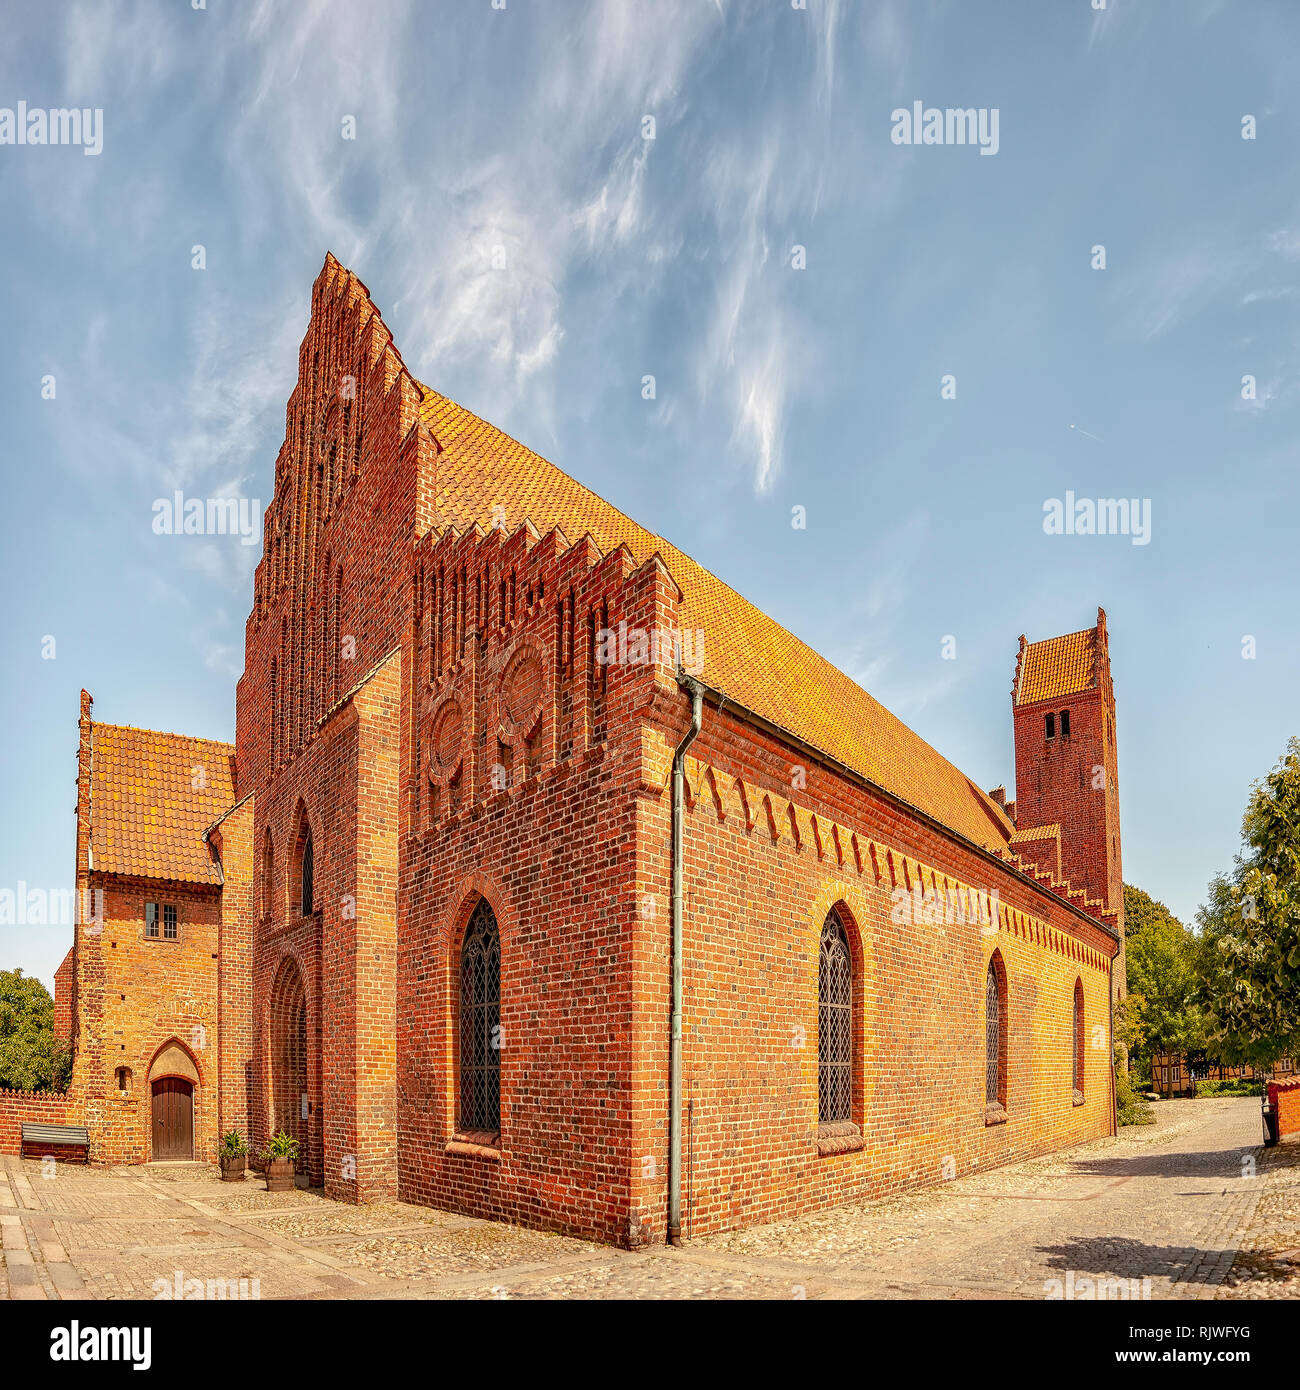 The Franciscan monastery situated in the swedish town of Ystad. Stock Photo